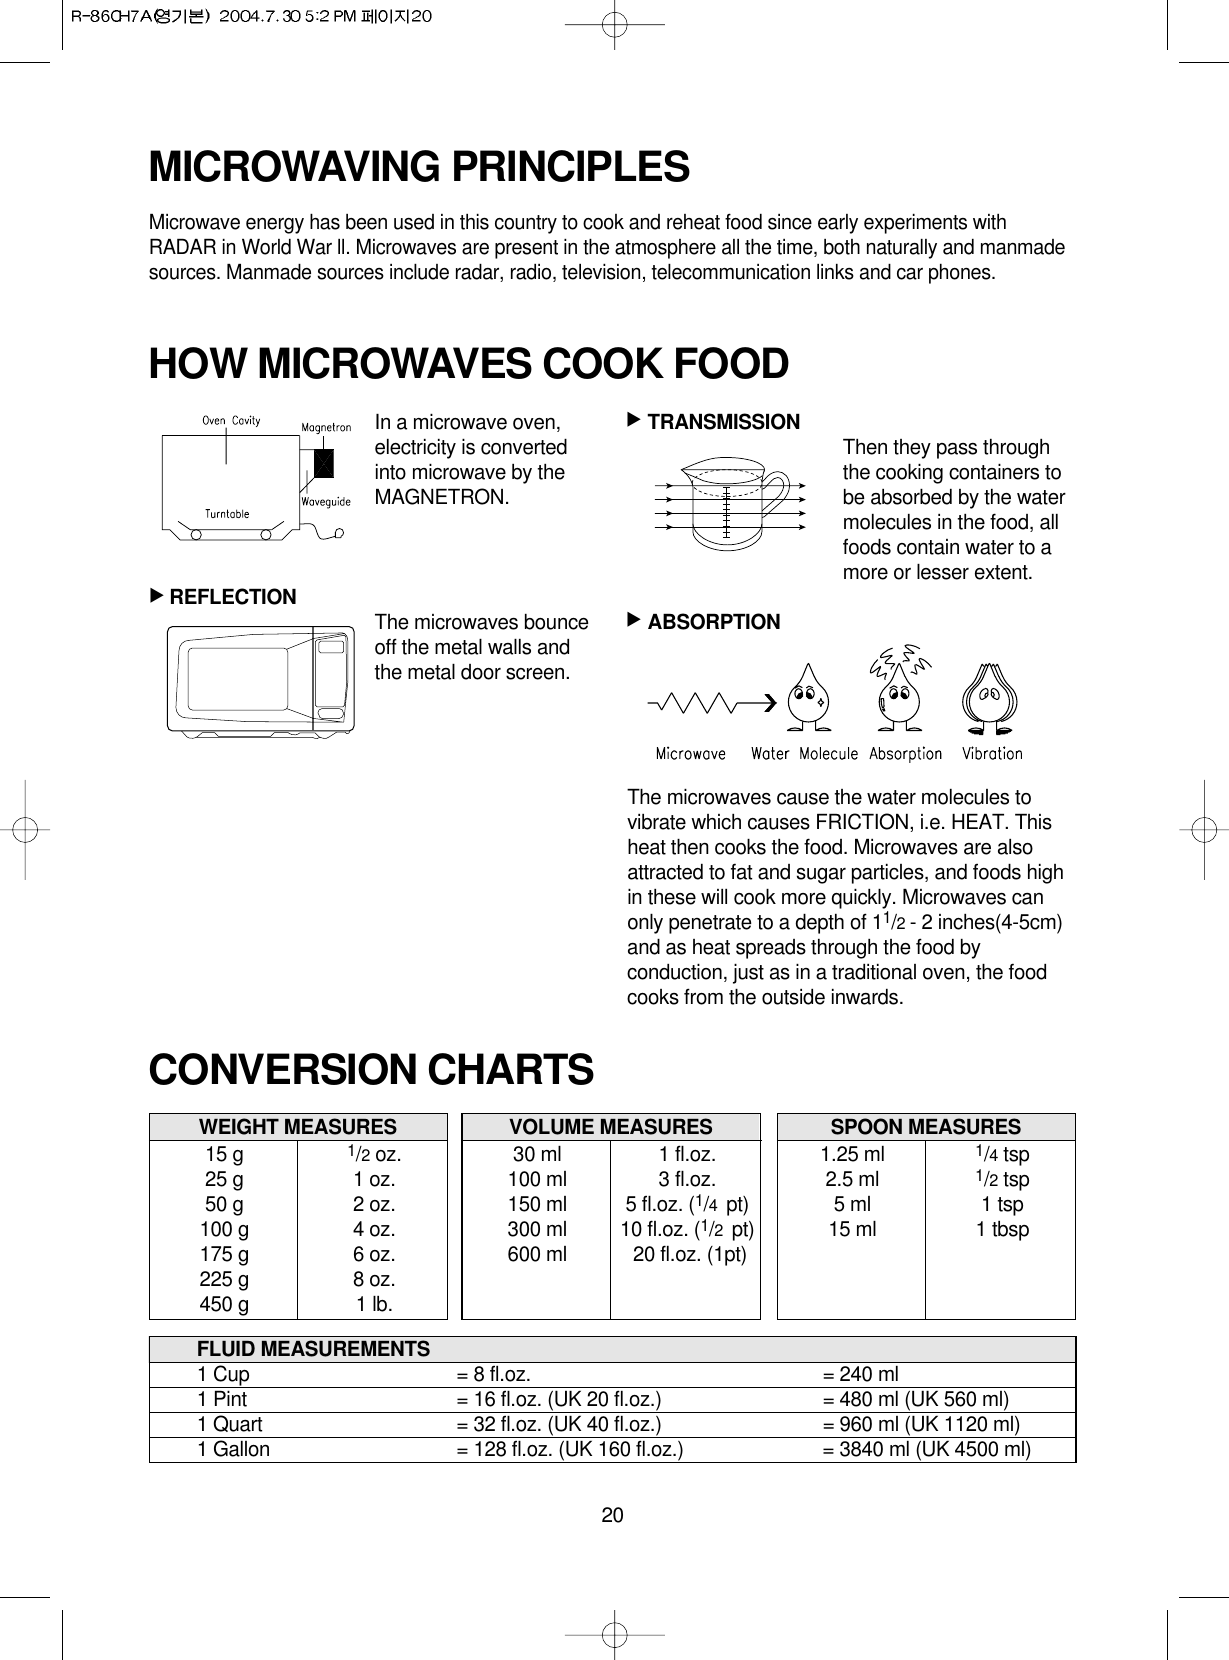 20MICROWAVING PRINCIPLESMicrowave energy has been used in this country to cook and reheat food since early experiments withRADAR in World War ll. Microwaves are present in the atmosphere all the time, both naturally and manmadesources. Manmade sources include radar, radio, television, telecommunication links and car phones.CONVERSION CHARTSIn a microwave oven,electricity is convertedinto microwave by theMAGNETRON.REFLECTION The microwaves bounceoff the metal walls andthe metal door screen.TRANSMISSION Then they pass throughthe cooking containers tobe absorbed by the watermolecules in the food, allfoods contain water to amore or lesser extent.ABSORPTIONThe microwaves cause the water molecules tovibrate which causes FRICTION, i.e. HEAT. Thisheat then cooks the food. Microwaves are alsoattracted to fat and sugar particles, and foods highin these will cook more quickly. Microwaves canonly penetrate to a depth of 11/2 - 2 inches(4-5cm)and as heat spreads through the food byconduction, just as in a traditional oven, the foodcooks from the outside inwards.WEIGHT MEASURES15 g 1/2oz.25 g 1 oz.50 g 2 oz.100 g 4 oz.175 g 6 oz.225 g 8 oz.450 g 1 lb.HOW MICROWAVES COOK FOOD▲▲▲VOLUME MEASURES30 ml 1 fl.oz.100 ml 3 fl.oz.150 ml 5 fl.oz. (1/4  pt)300 ml 10 fl.oz. (1/2  pt)600 ml 20 fl.oz. (1pt)SPOON MEASURES1.25 ml 1/4tsp2.5 ml 1/2tsp5 ml 1 tsp15 ml 1 tbspFLUID MEASUREMENTS1 Cup = 8 fl.oz. = 240 ml1 Pint = 16 fl.oz. (UK 20 fl.oz.) = 480 ml (UK 560 ml)1 Quart = 32 fl.oz. (UK 40 fl.oz.) = 960 ml (UK 1120 ml)1 Gallon = 128 fl.oz. (UK 160 fl.oz.) = 3840 ml (UK 4500 ml)